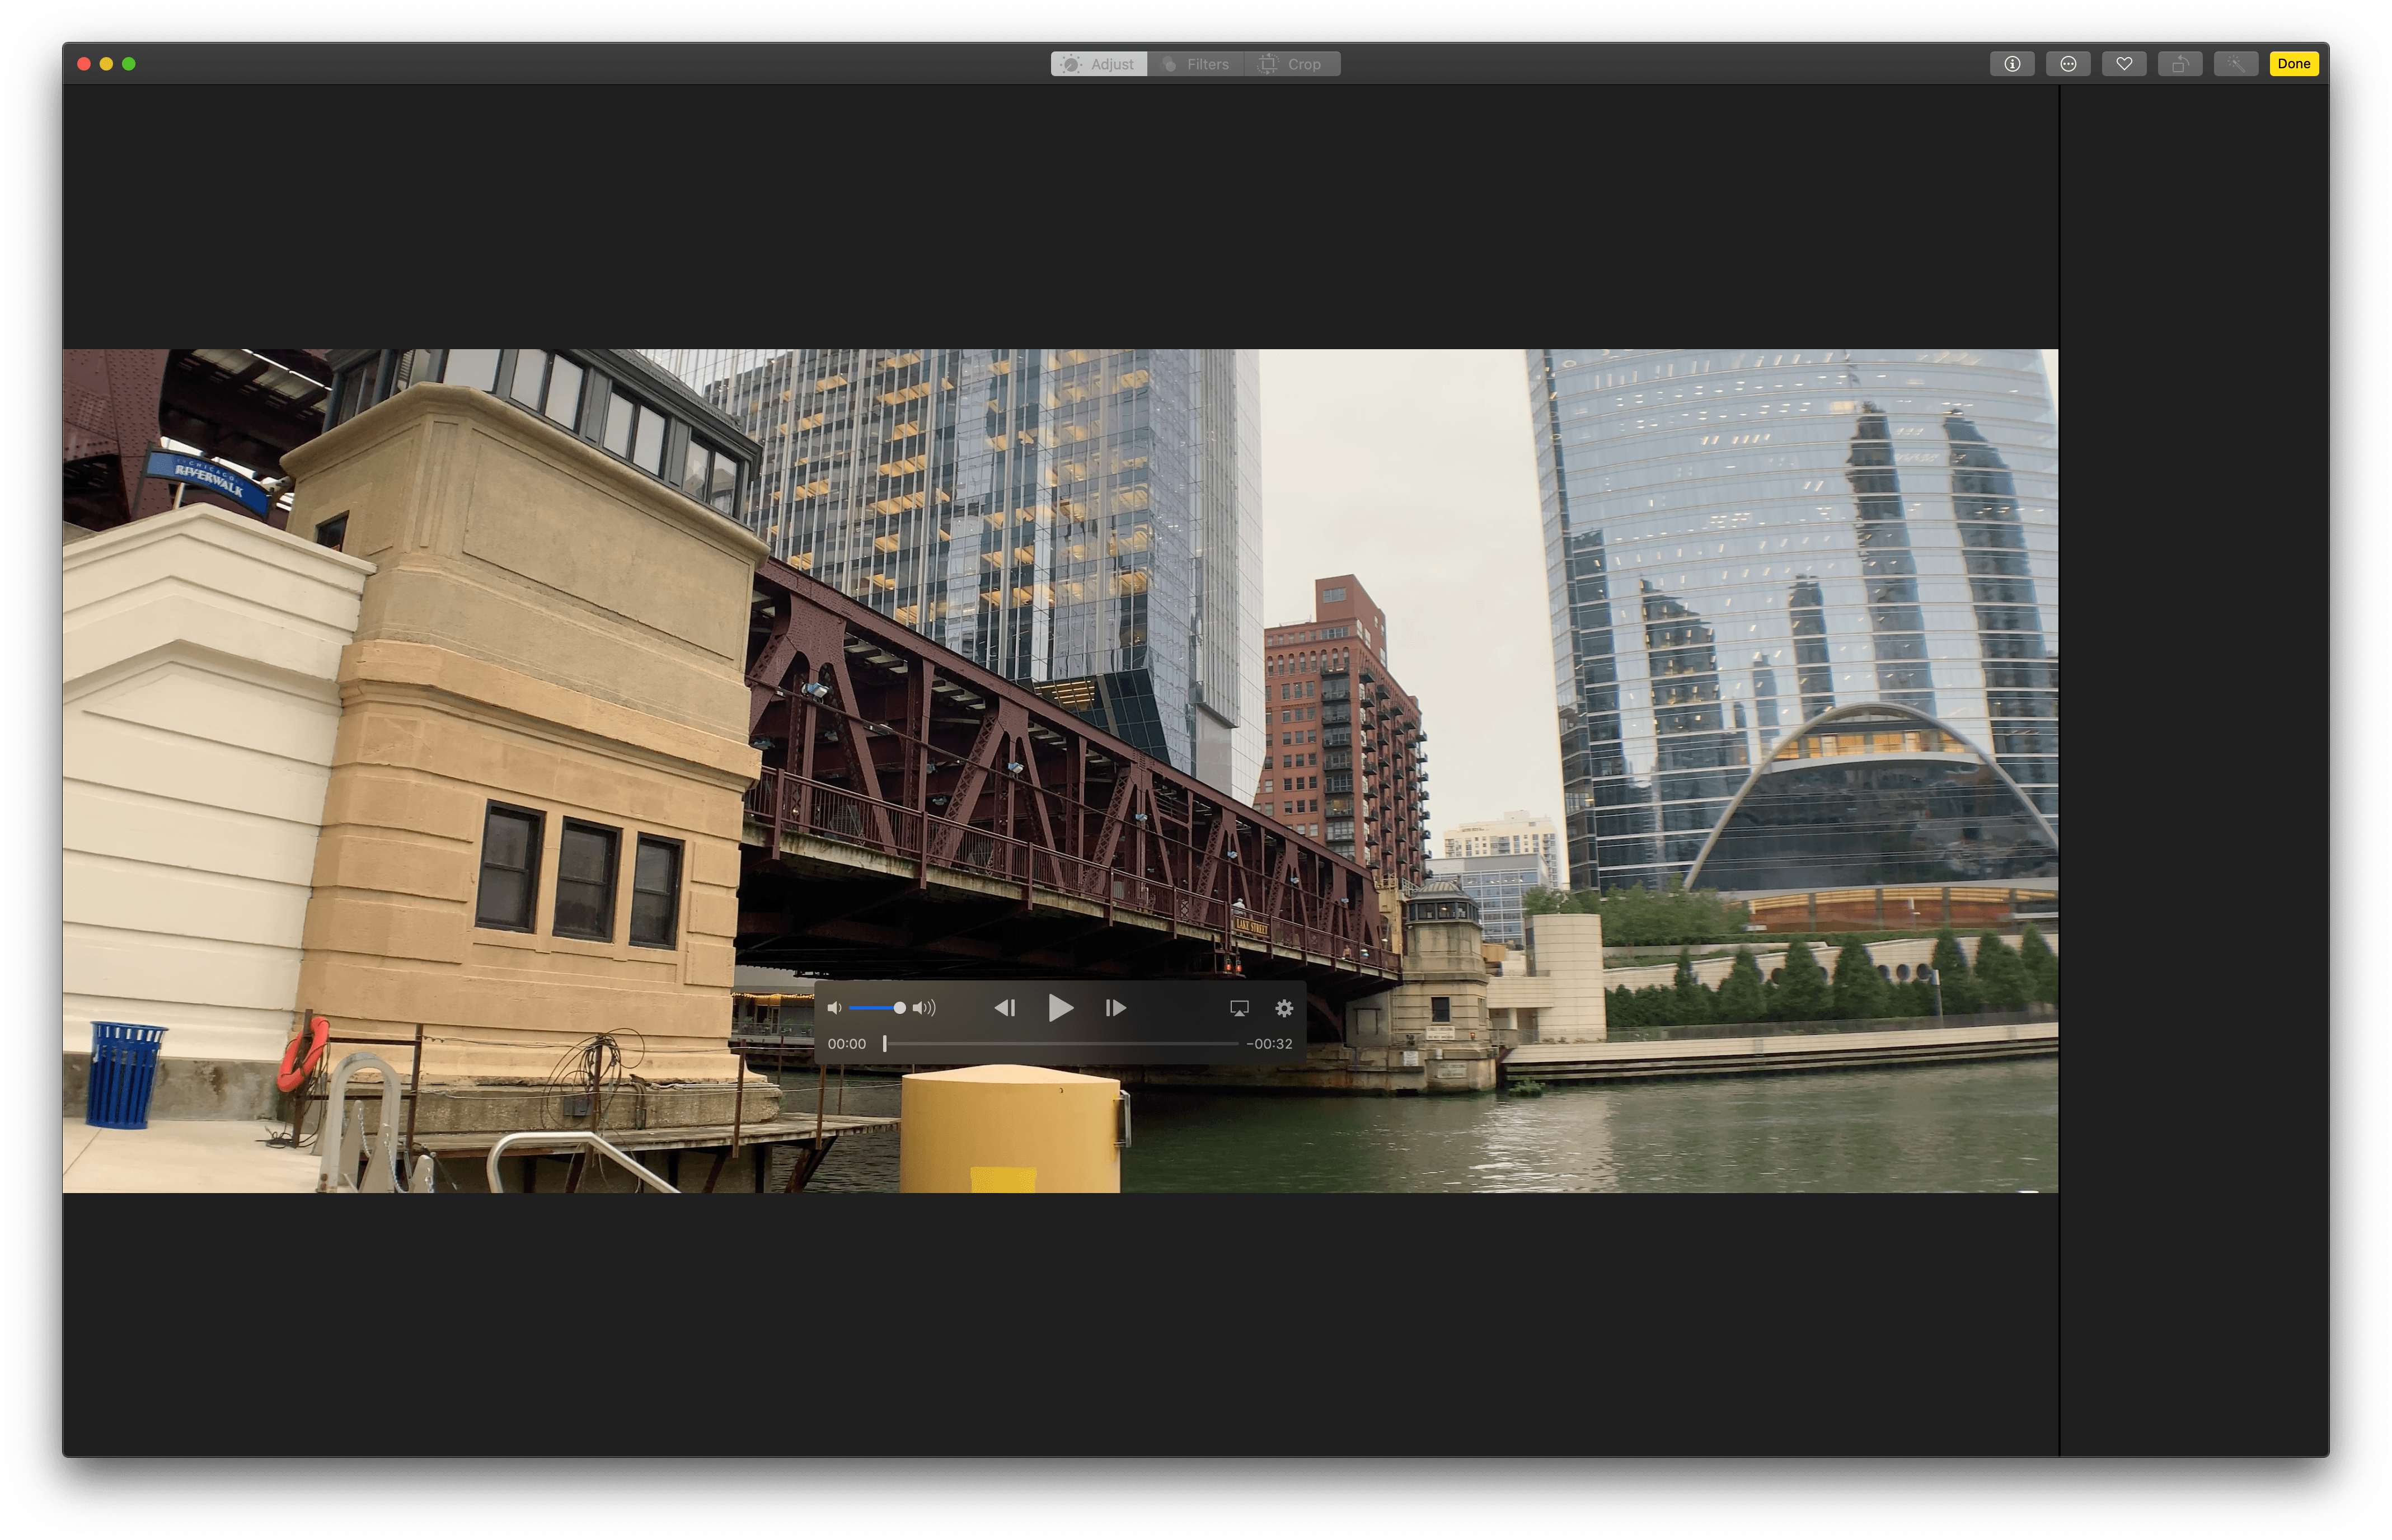 Unlike iOS, video editing on the Mac is limited to trimming in Photos.